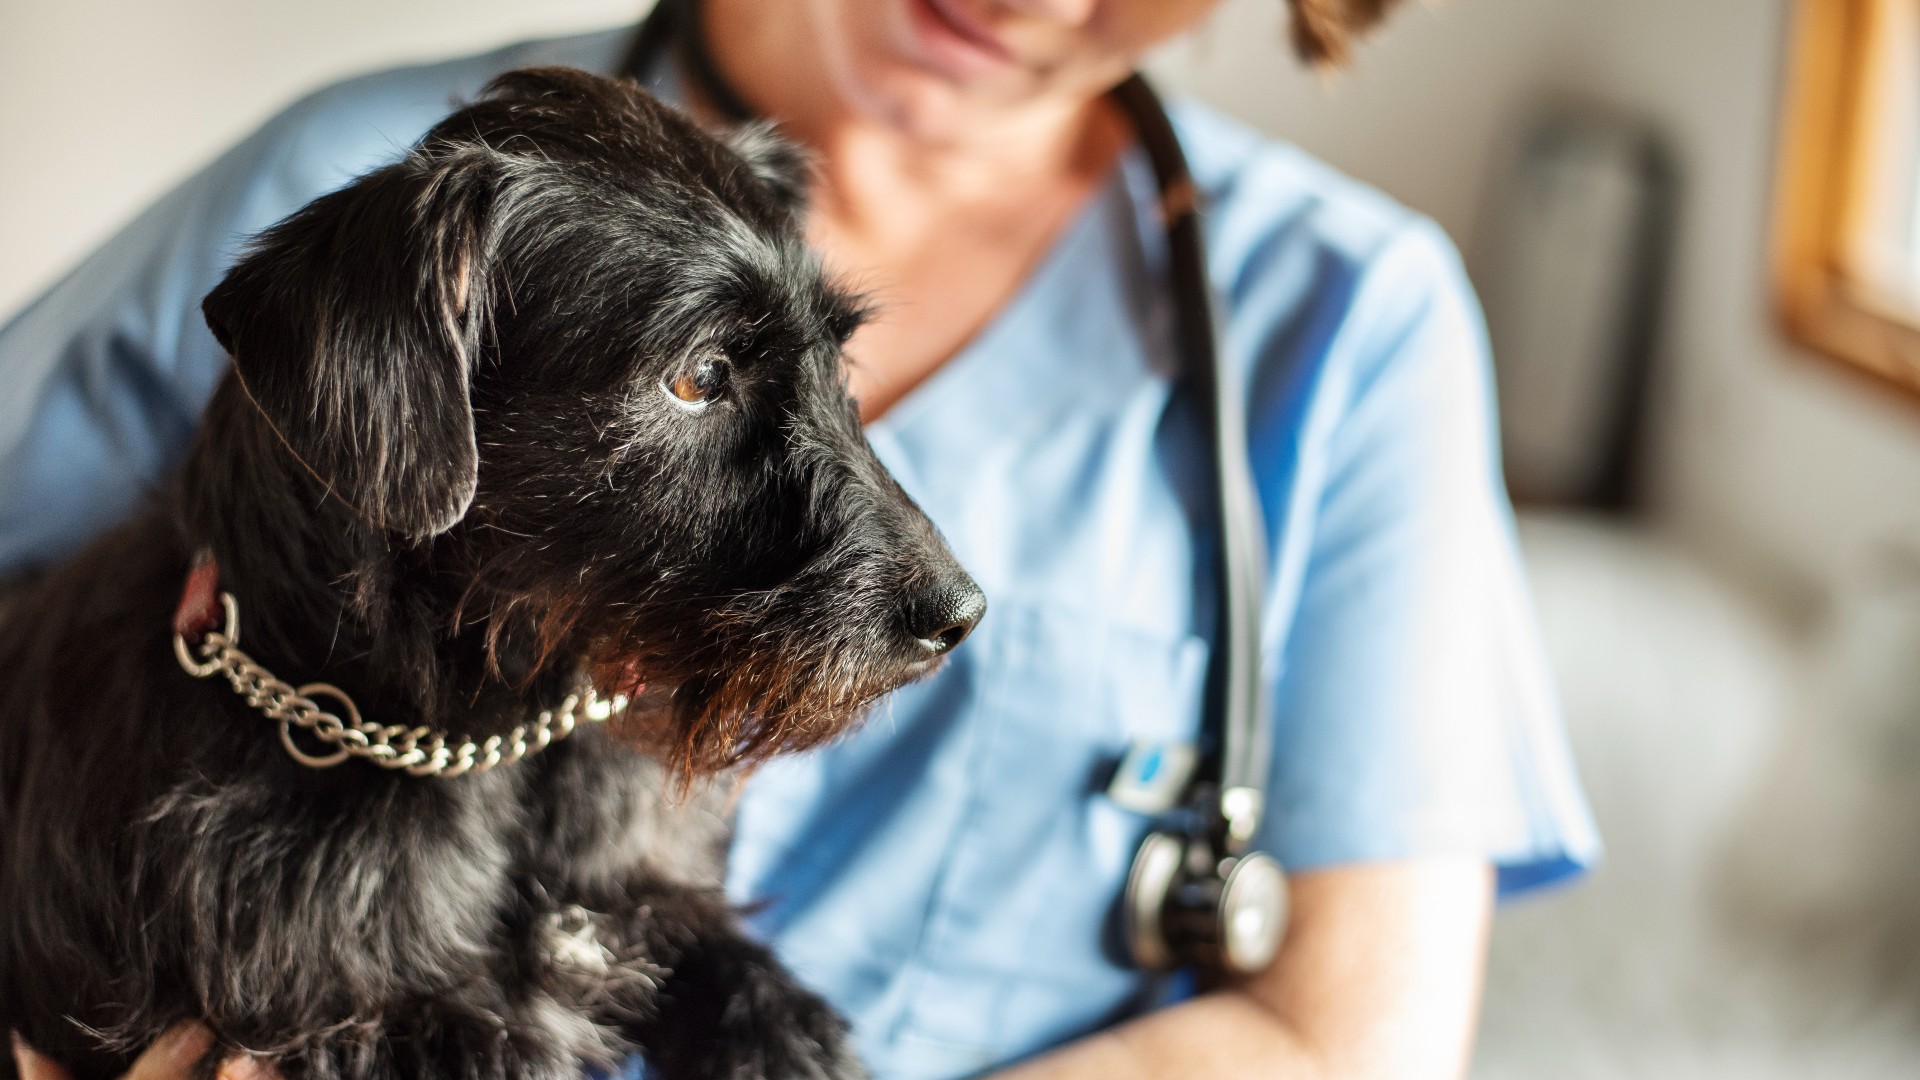 Female veterinarian holding a black schnauzer dog in her arms while standing in her office